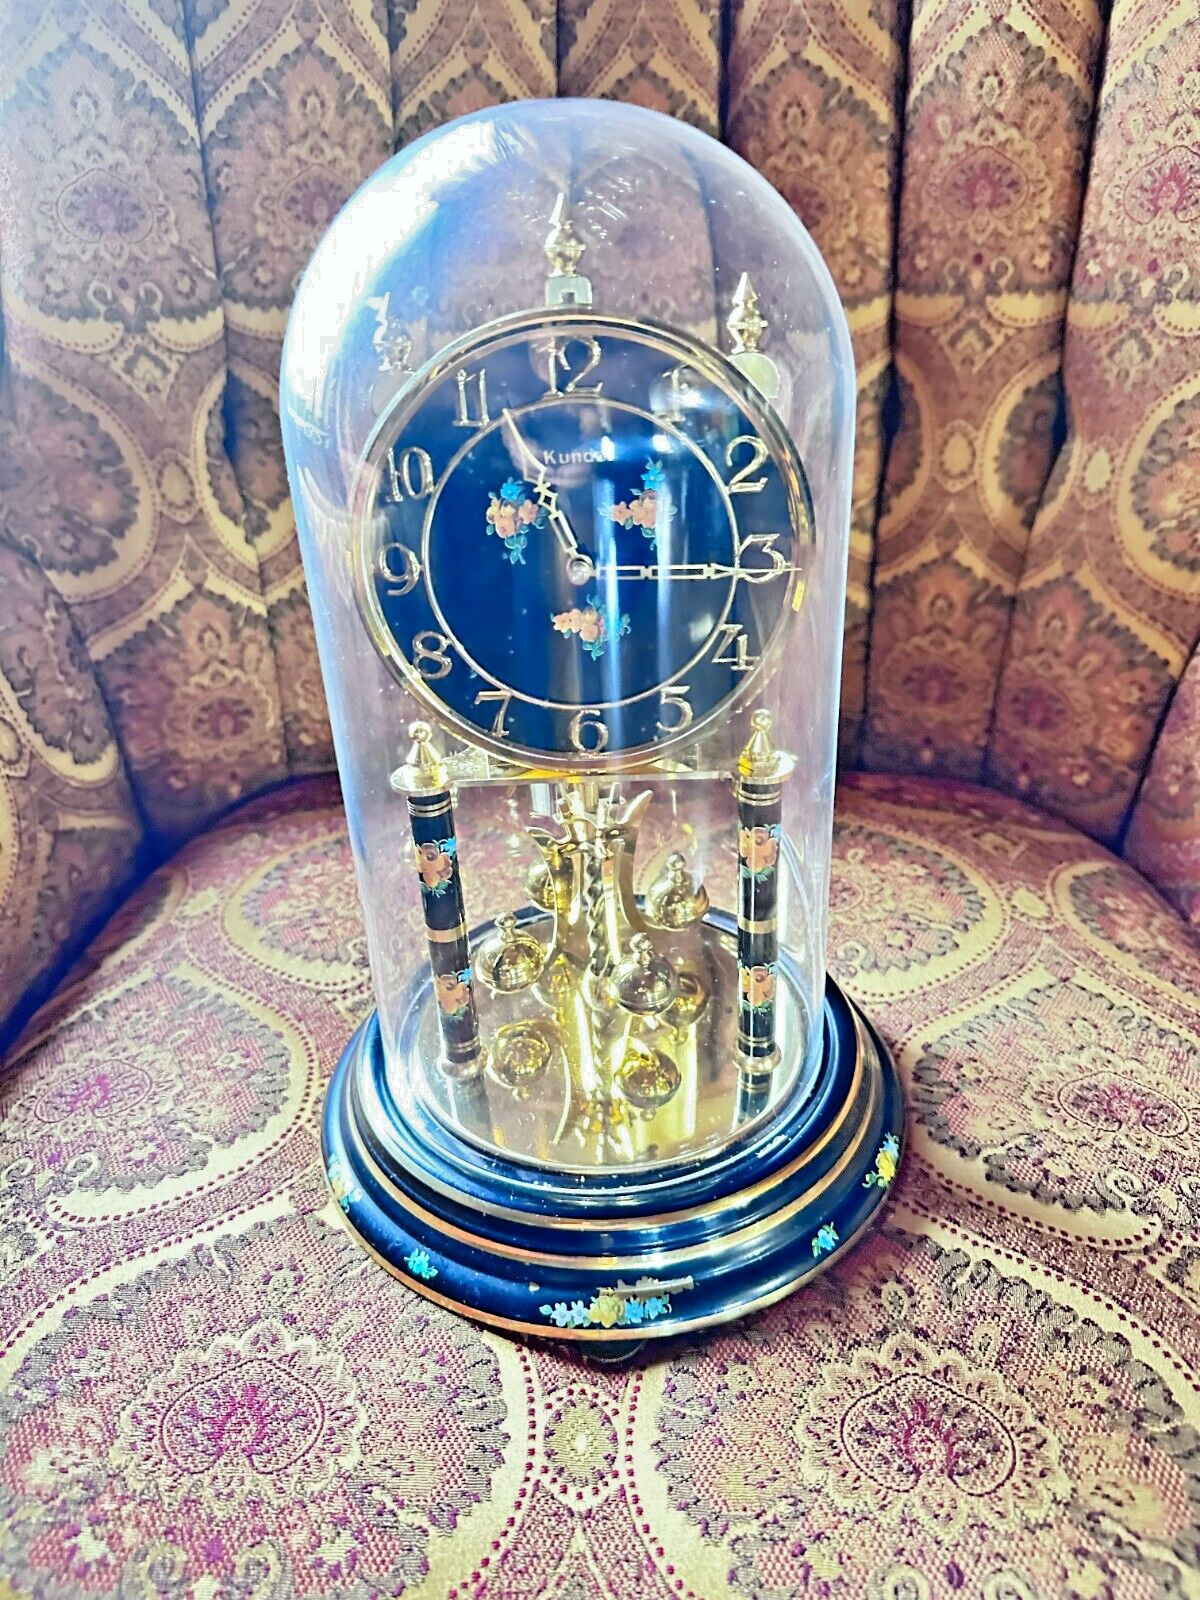 VINTAGE KUNDO CLOCK - FOR PARTS ONLY